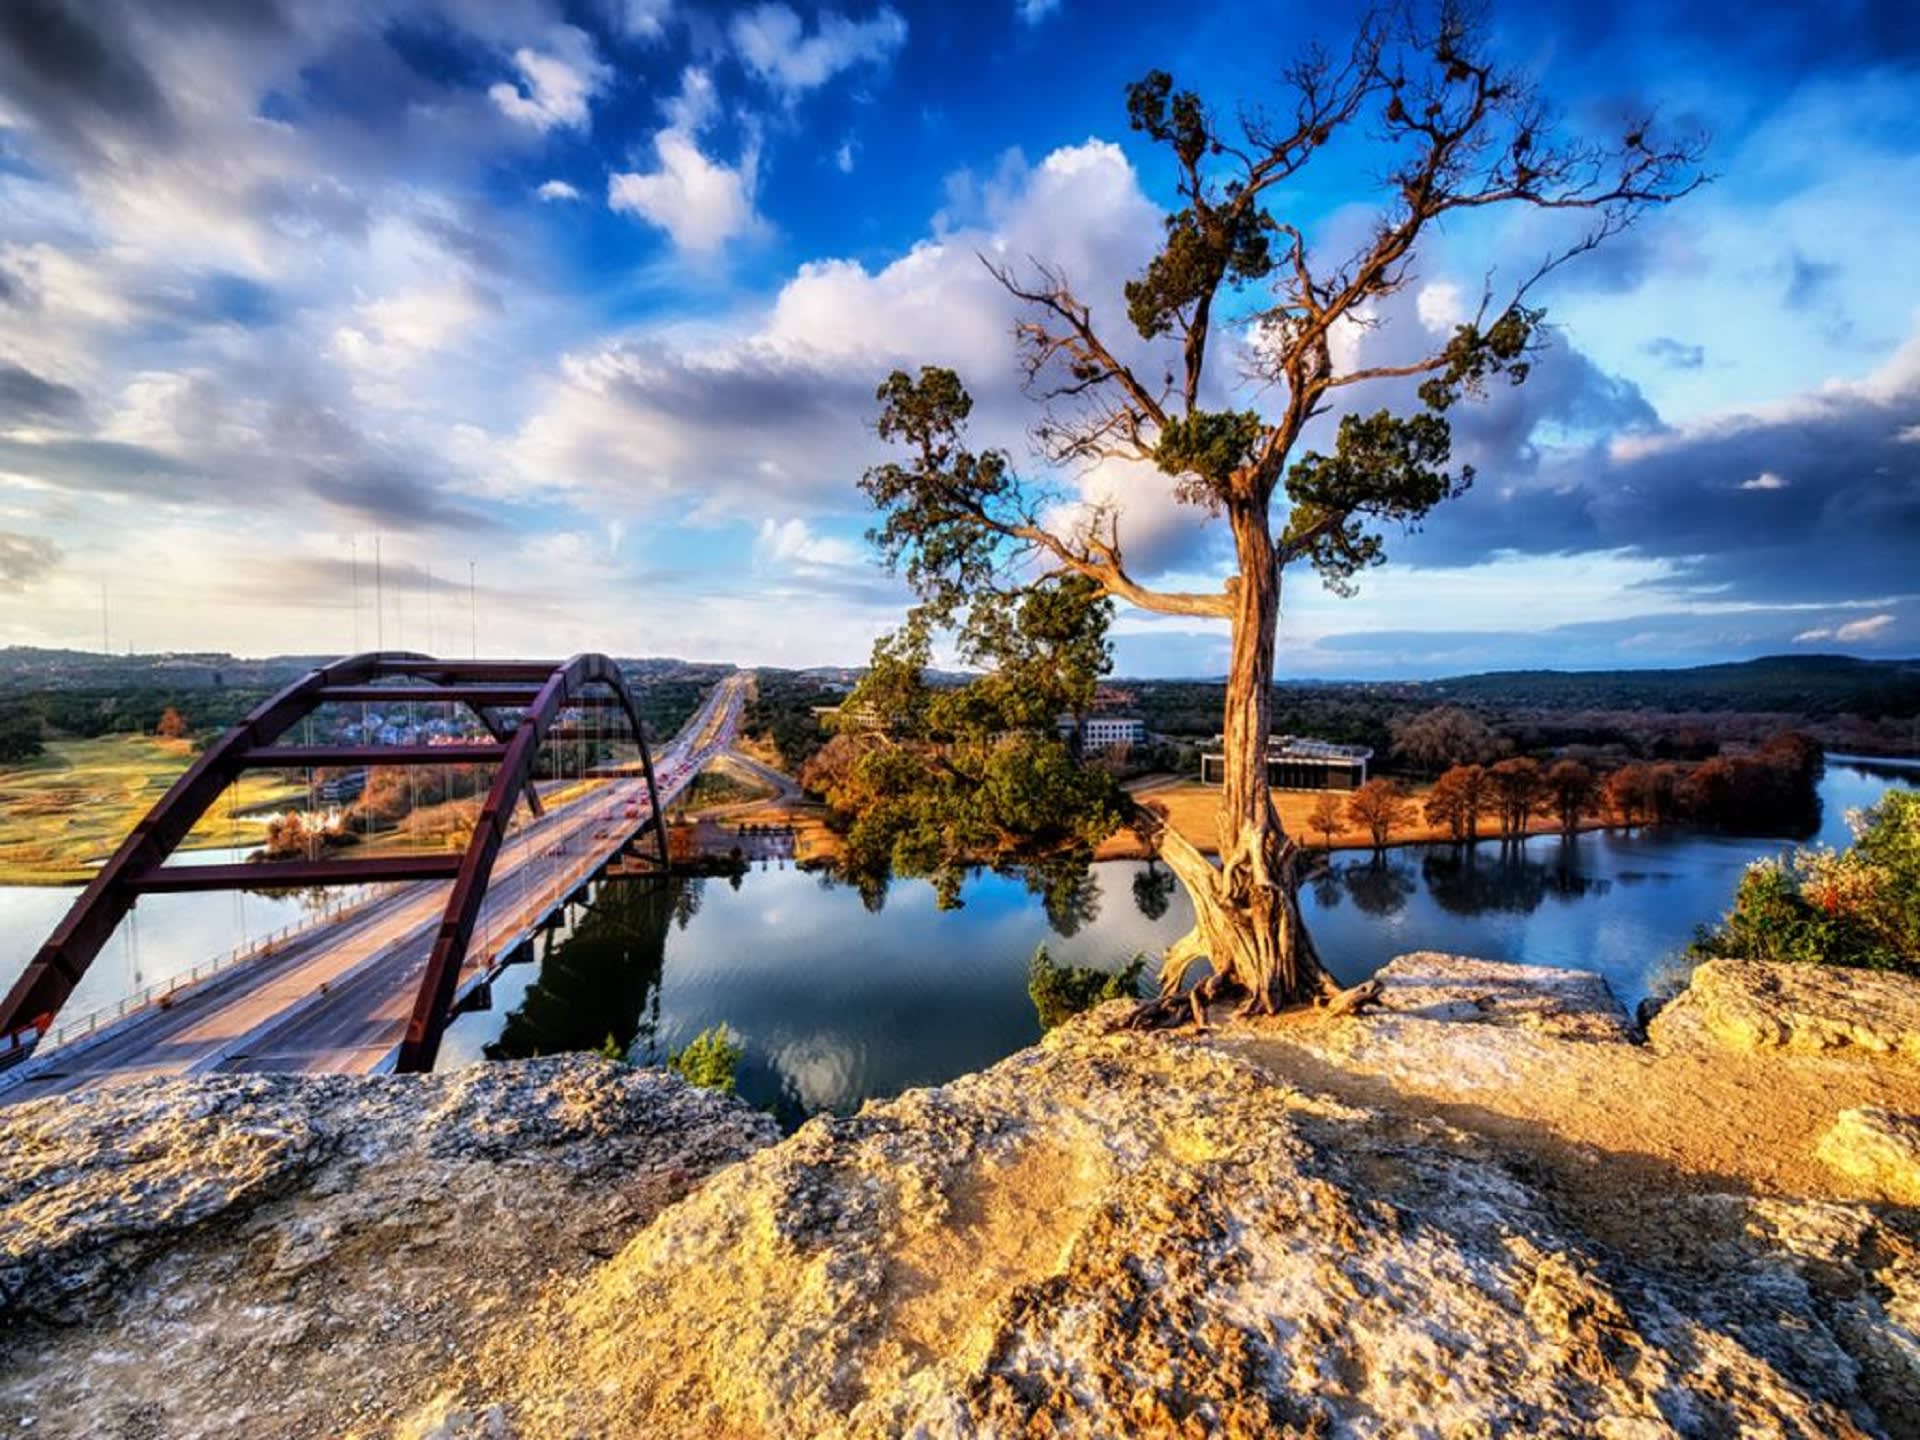 Texas Hill Country & LBJ Ranch Tour from Austin